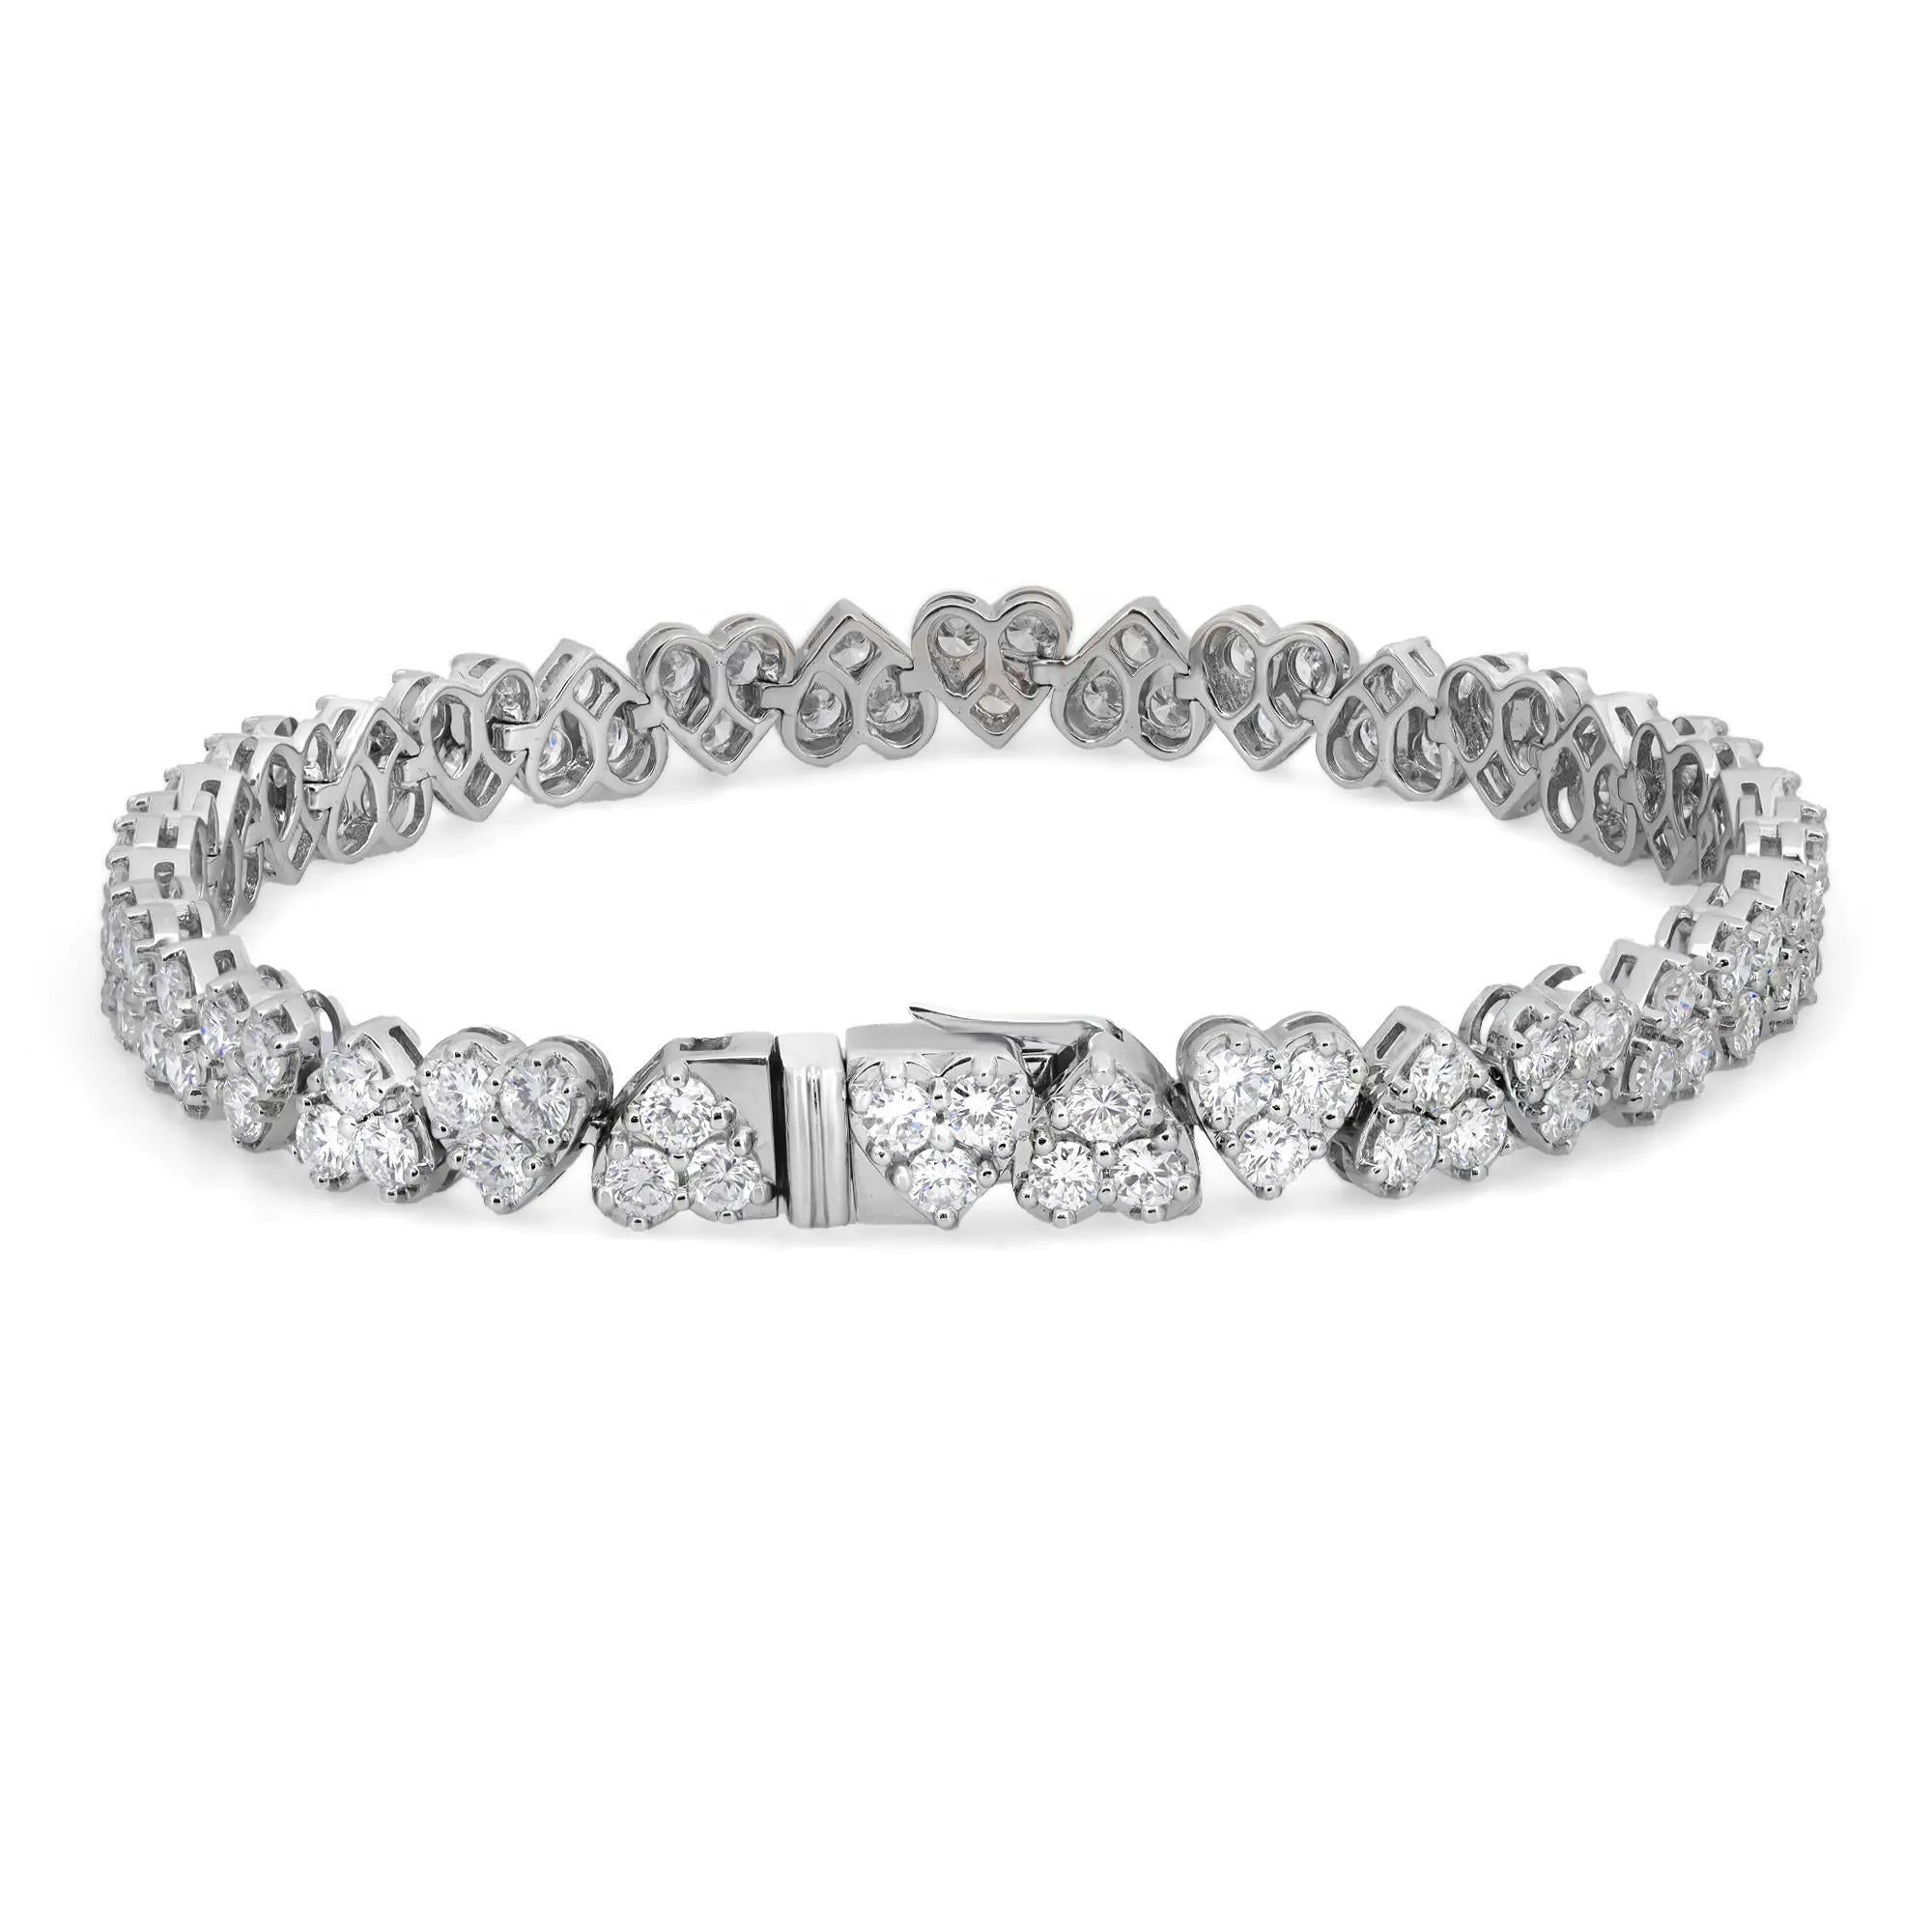 Introducing our enchanting 6.48 Carat Heart Illusion Diamond Bracelet, a masterpiece meticulously fashioned in 18K white gold. This bracelet showcases a dazzling array of diamonds skillfully arranged to create the illusion of delicate hearts,